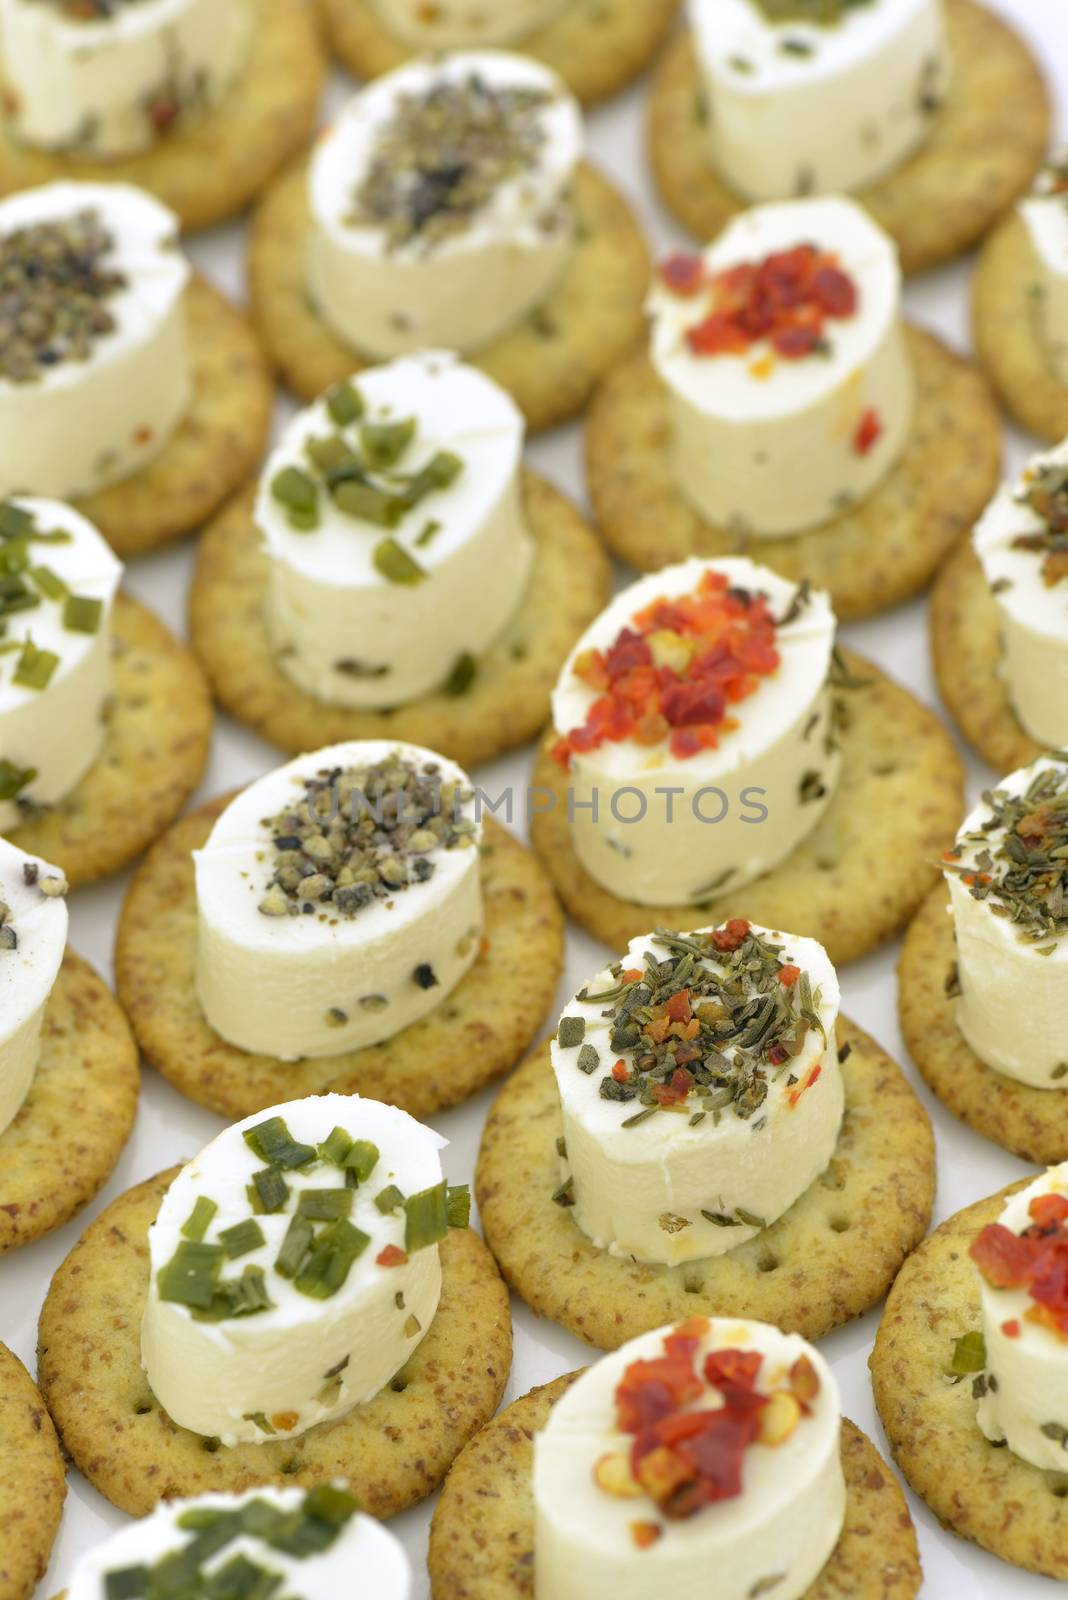 Cheese appetizer with biscuit by Hbak